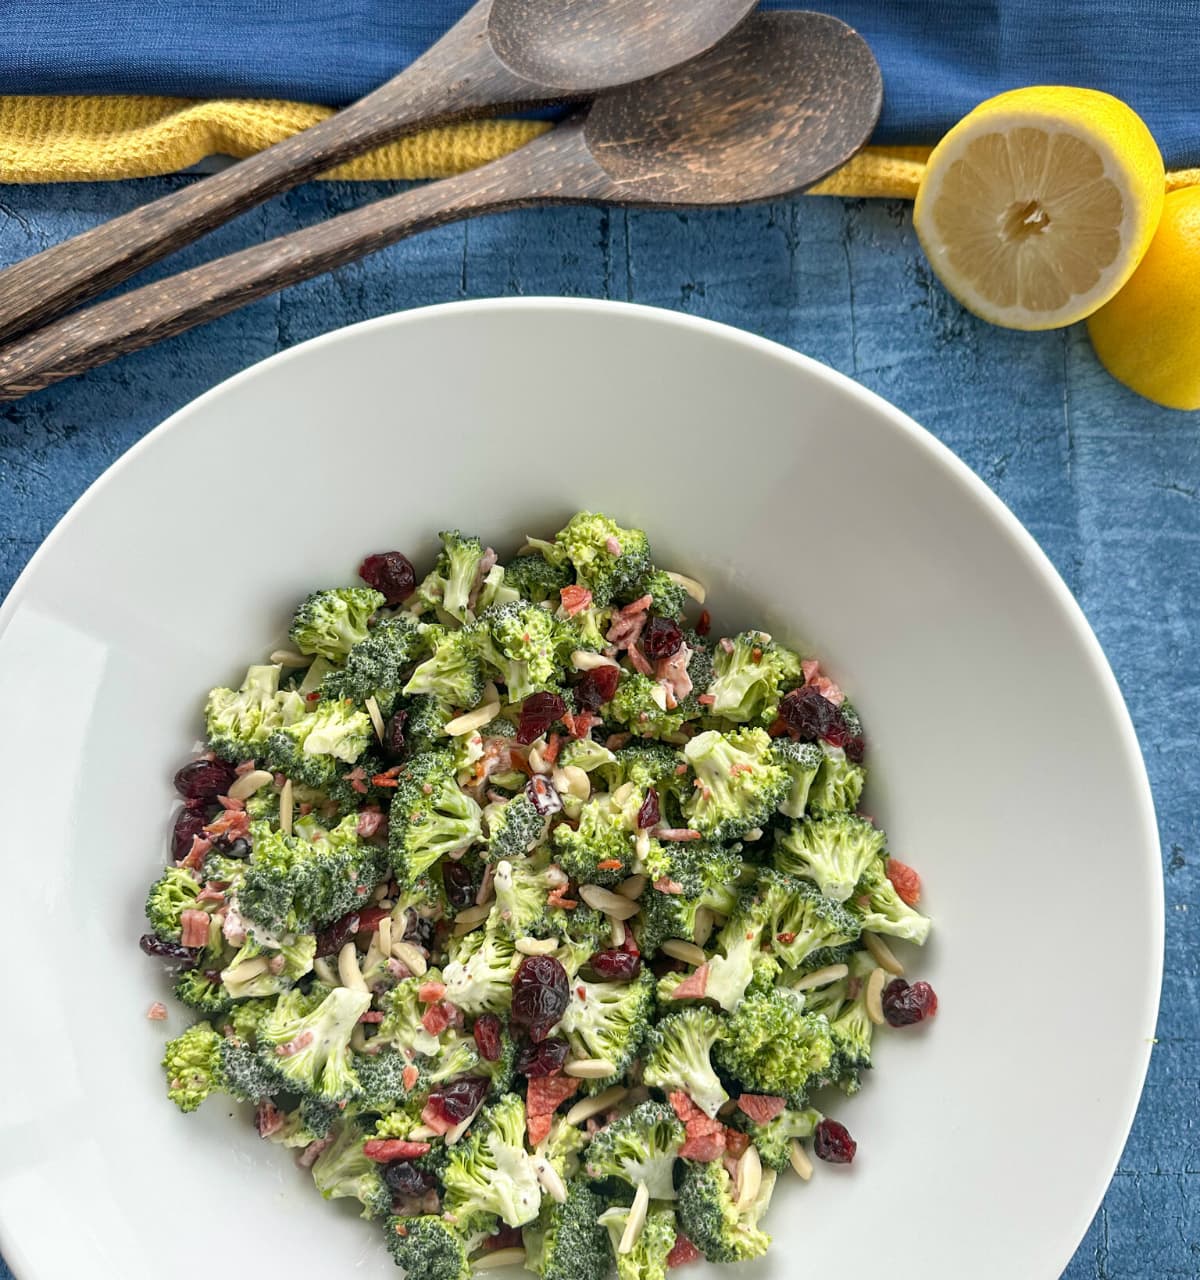 Creamy Broccoli Salad in a large white bowl with wooden salad serves and lemons